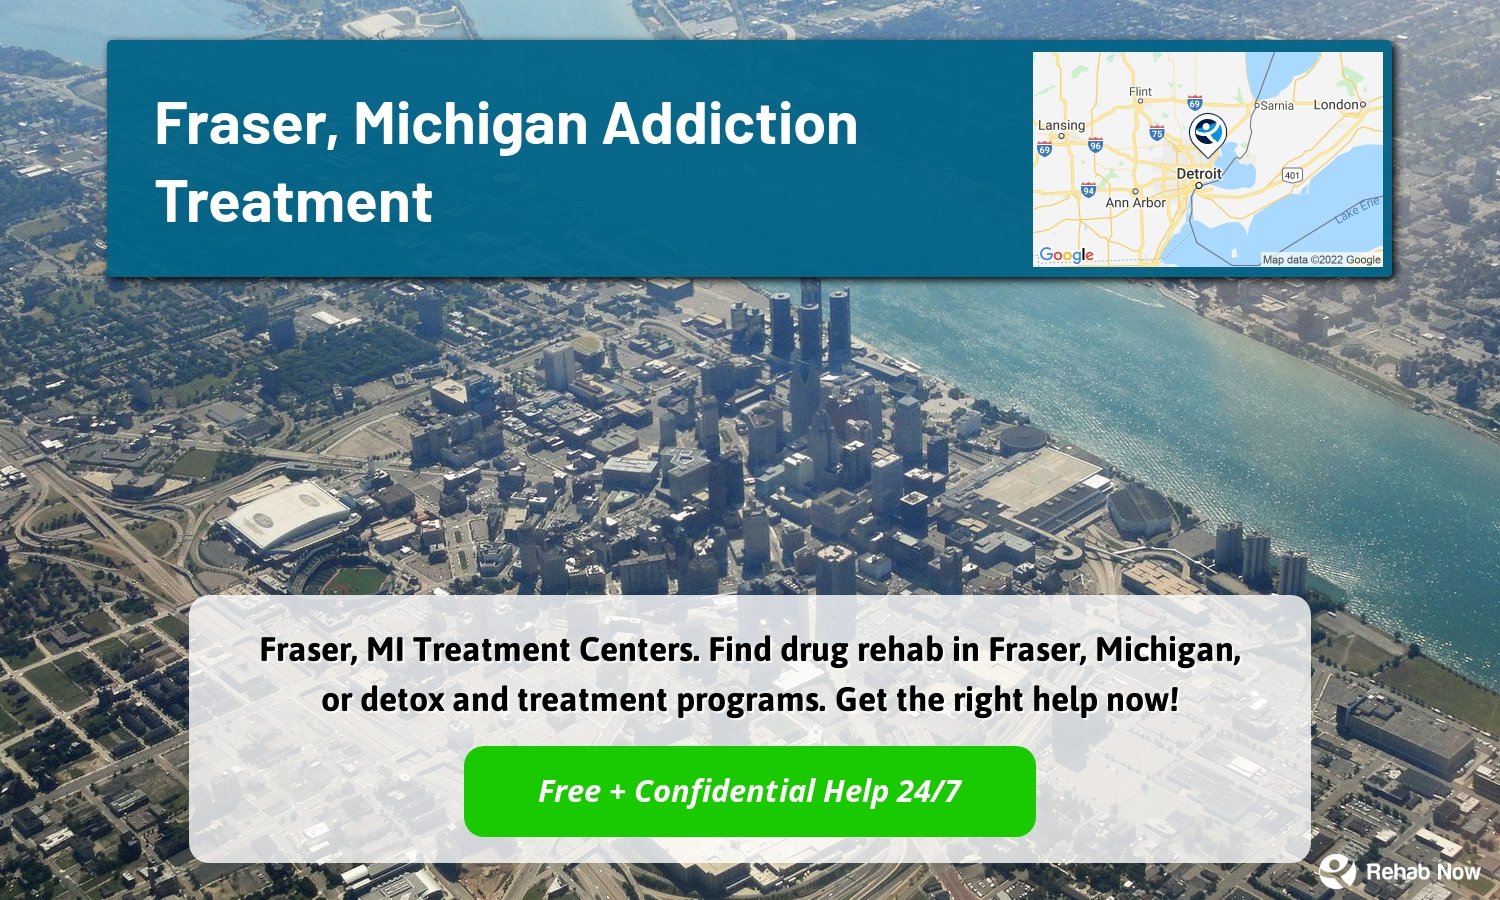 Fraser, MI Treatment Centers. Find drug rehab in Fraser, Michigan, or detox and treatment programs. Get the right help now!